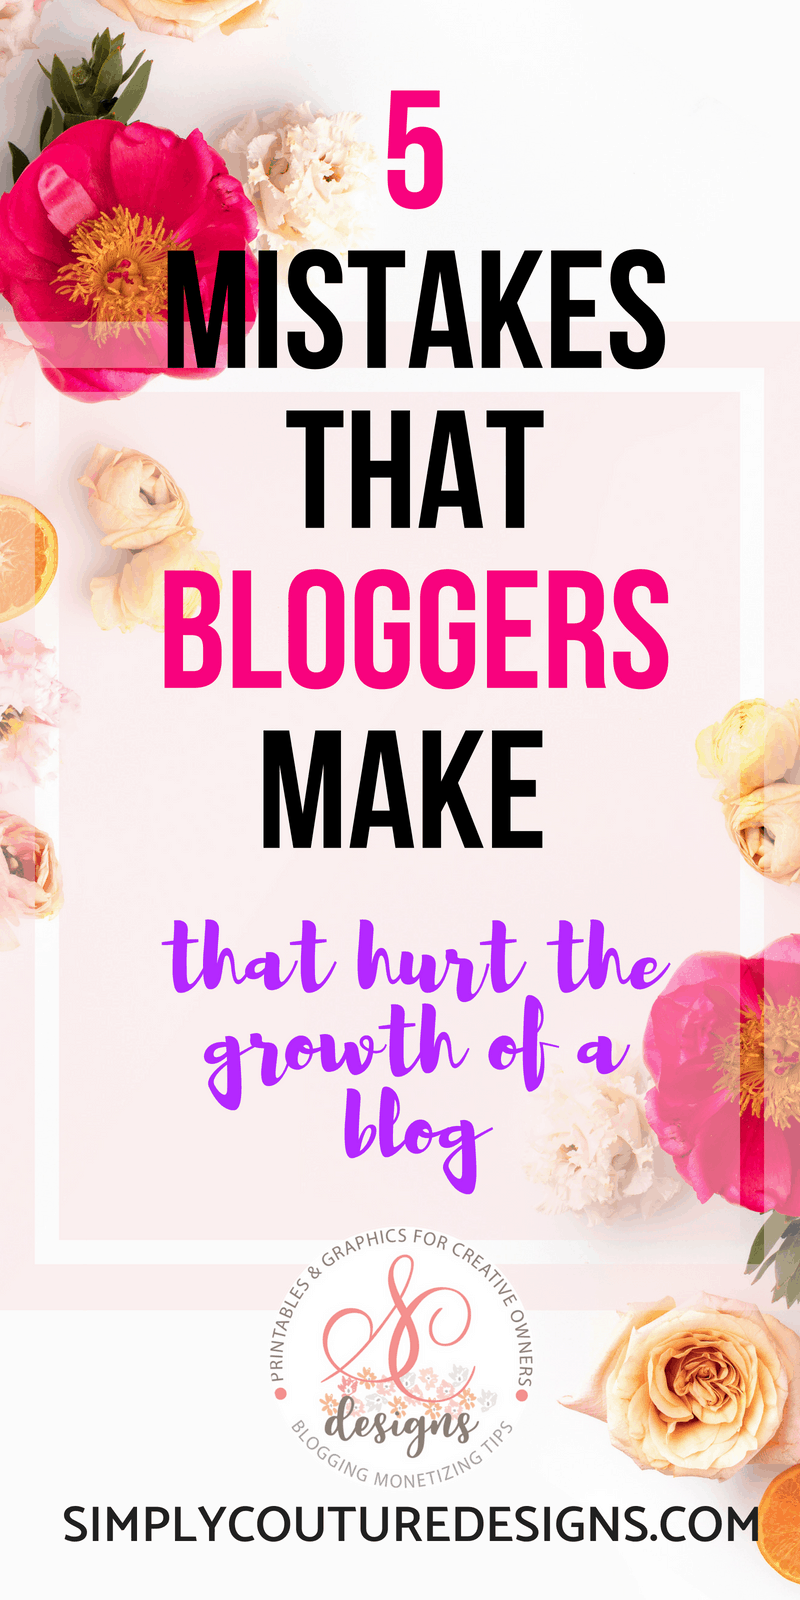 5 blogger mistakes that can hurt the growth of your blog